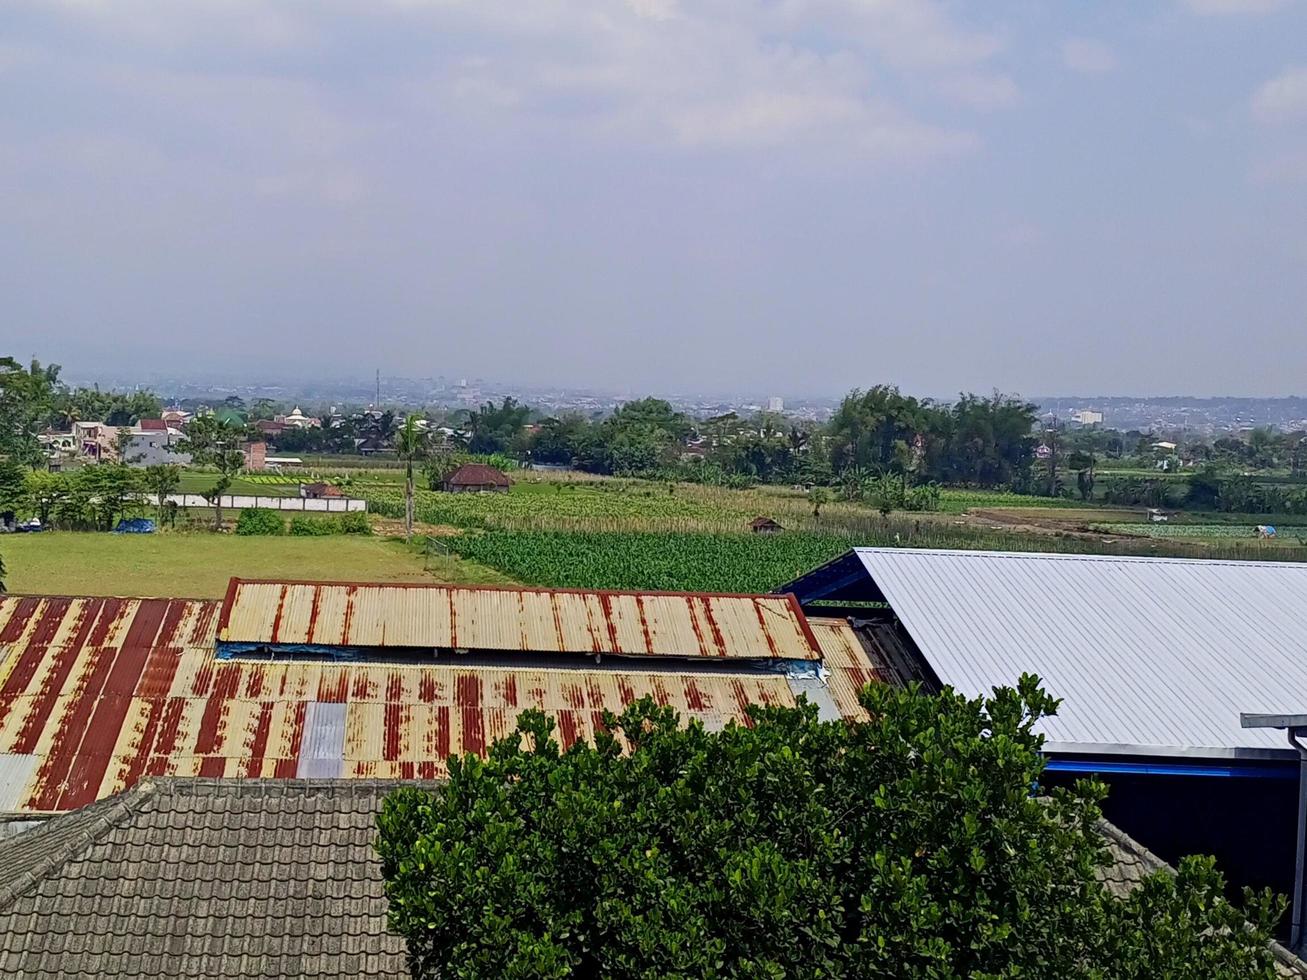 View of the rice fields and sky taken from the top of the 5th floor building photo